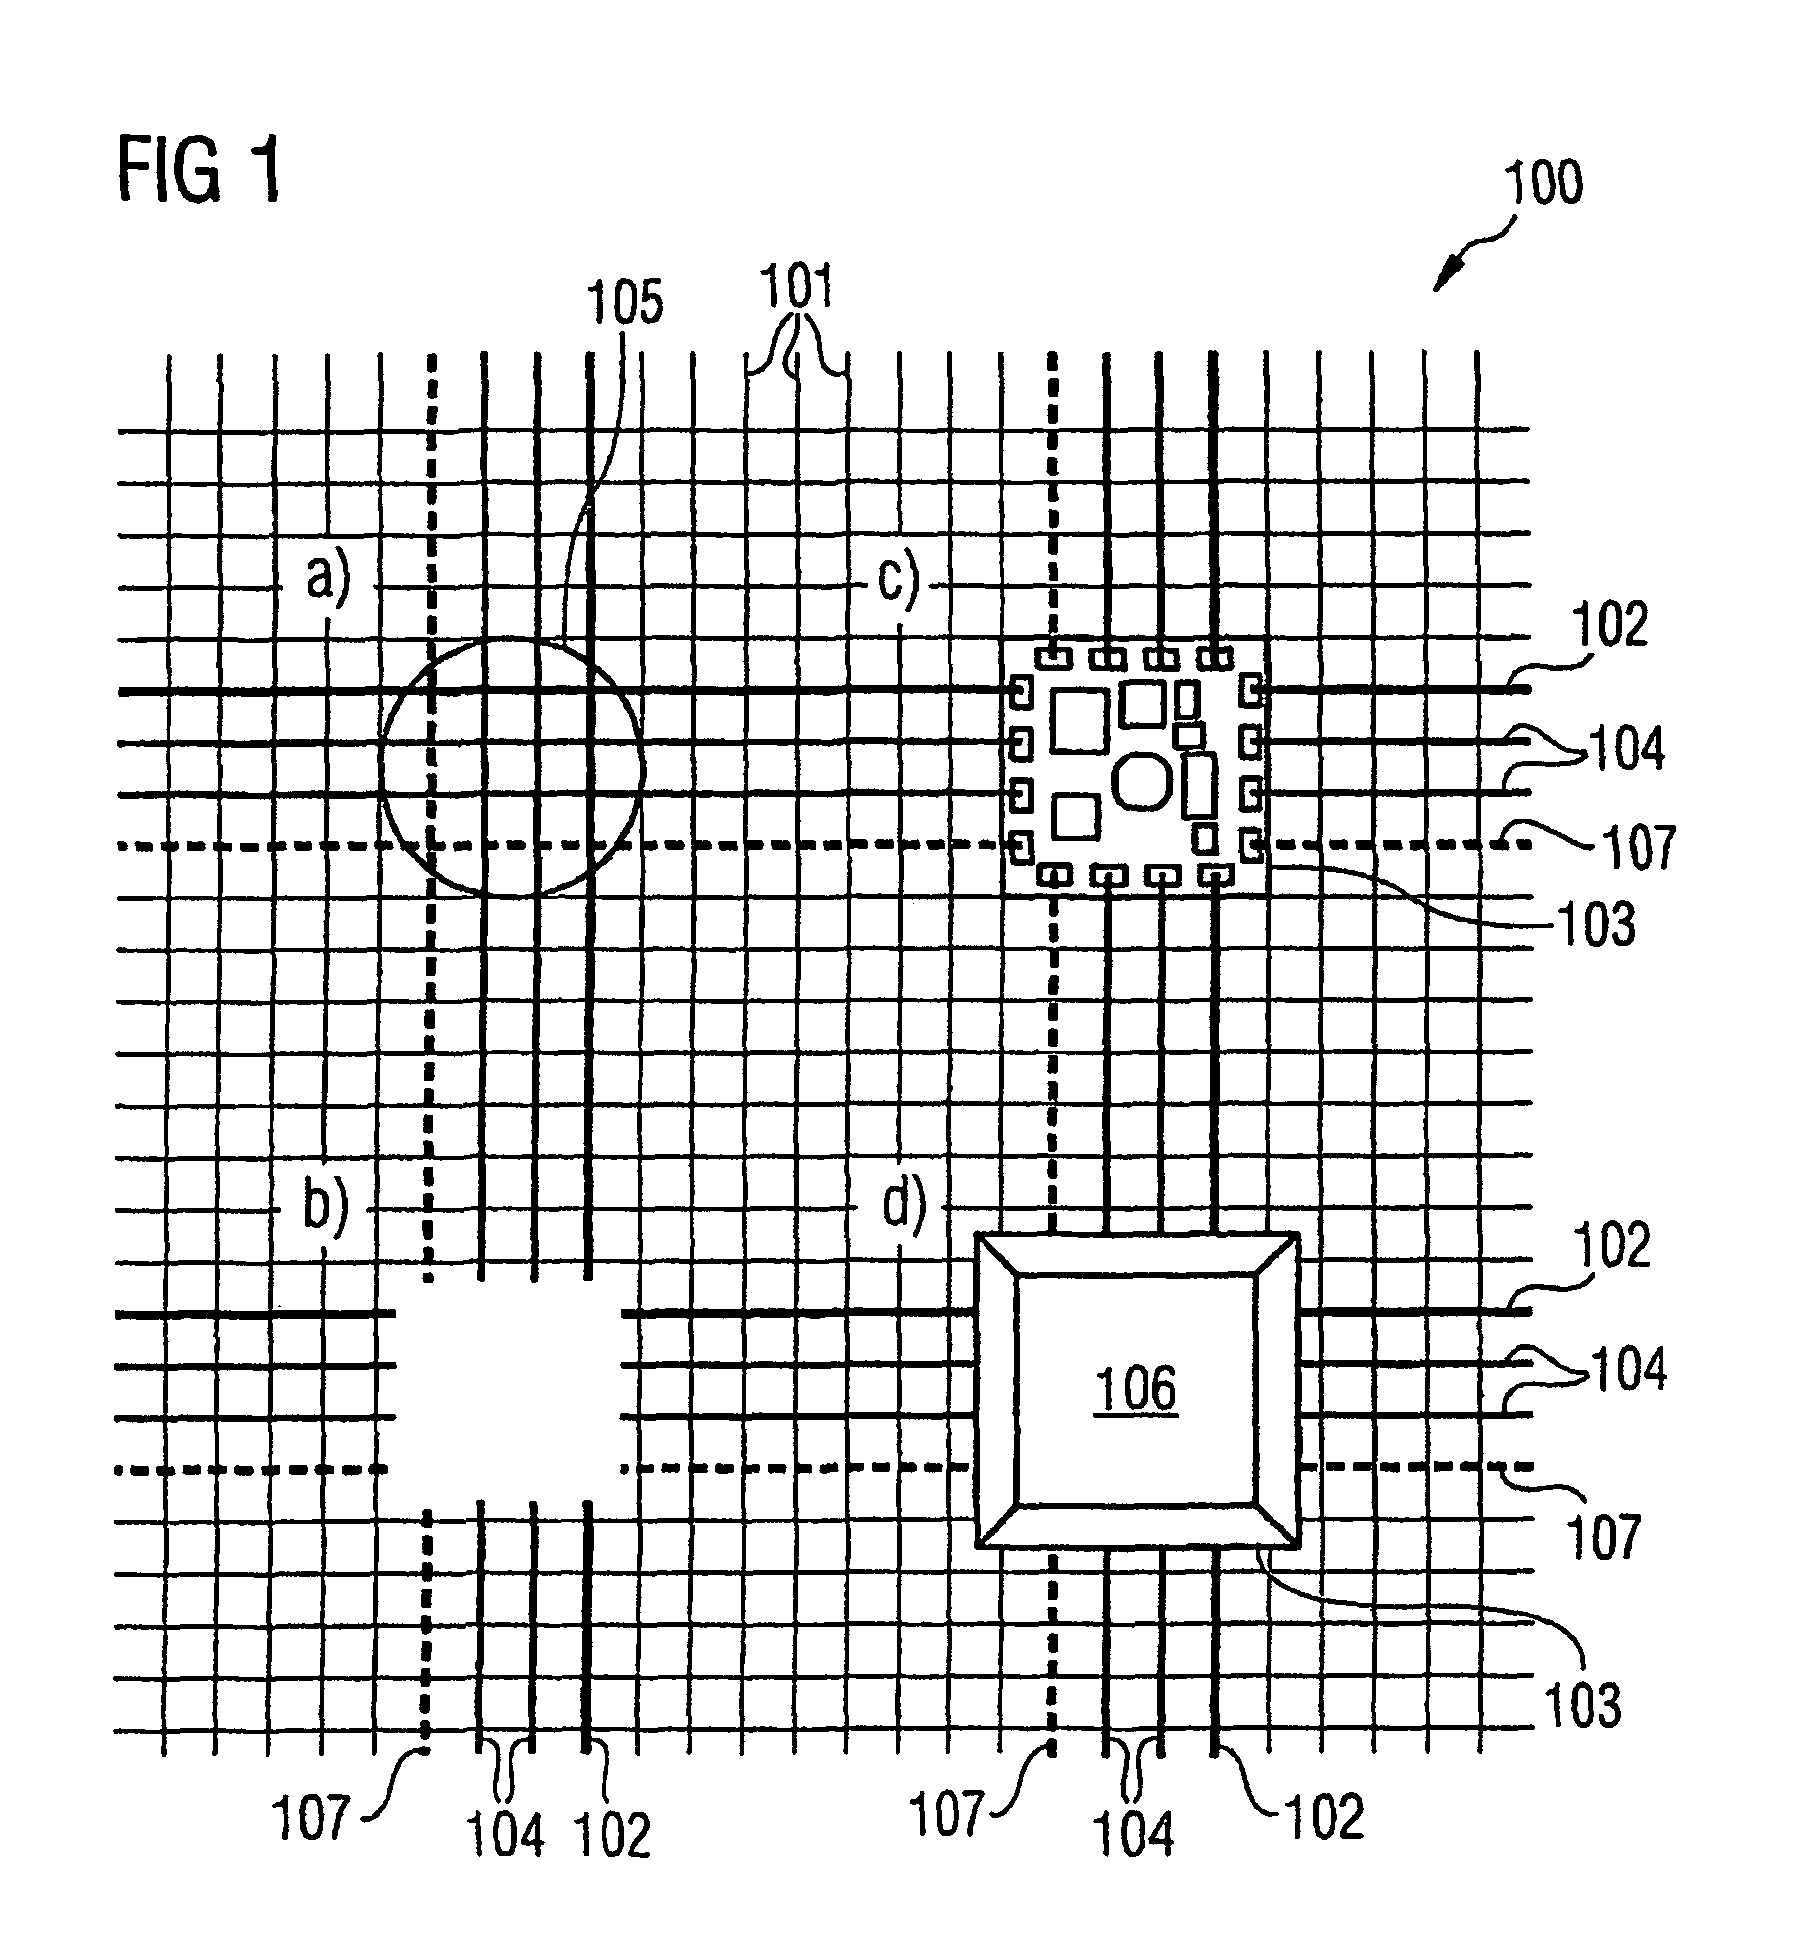 Processor array having a multiplicity of processor elements and method of transmitting electricity between processor elements